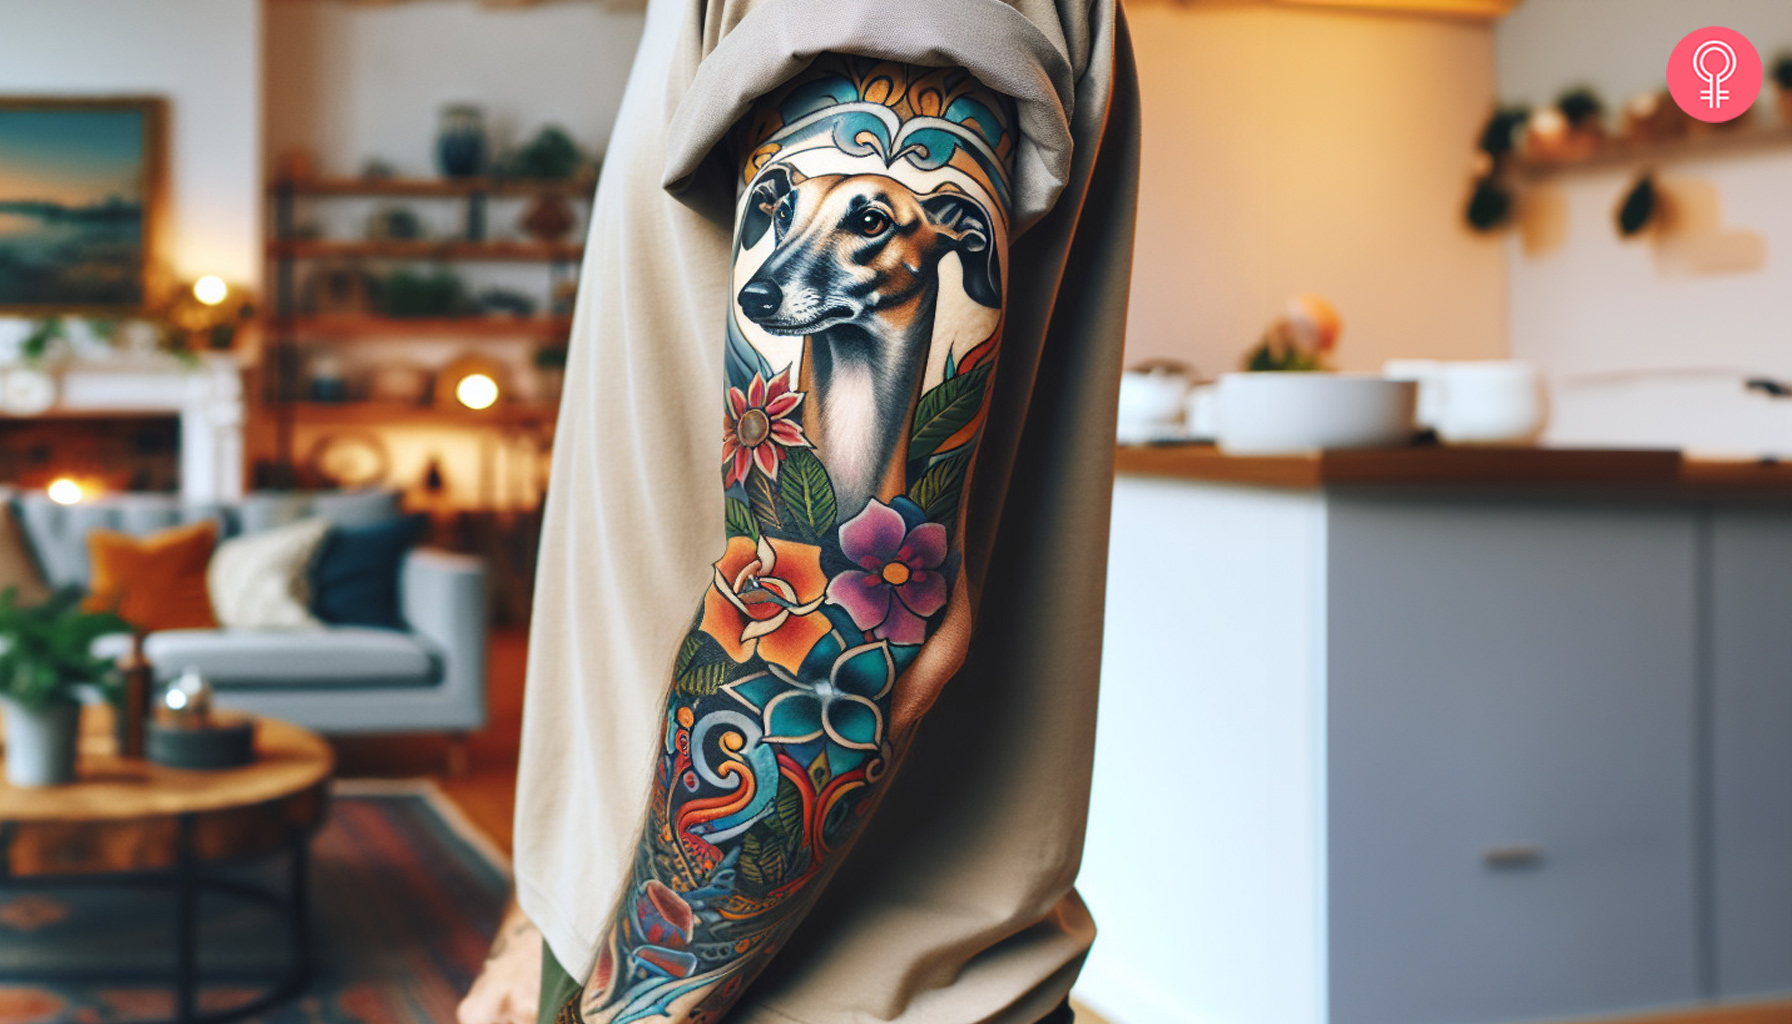 A traditional greyhound tattoo sleeve on the arm of a man